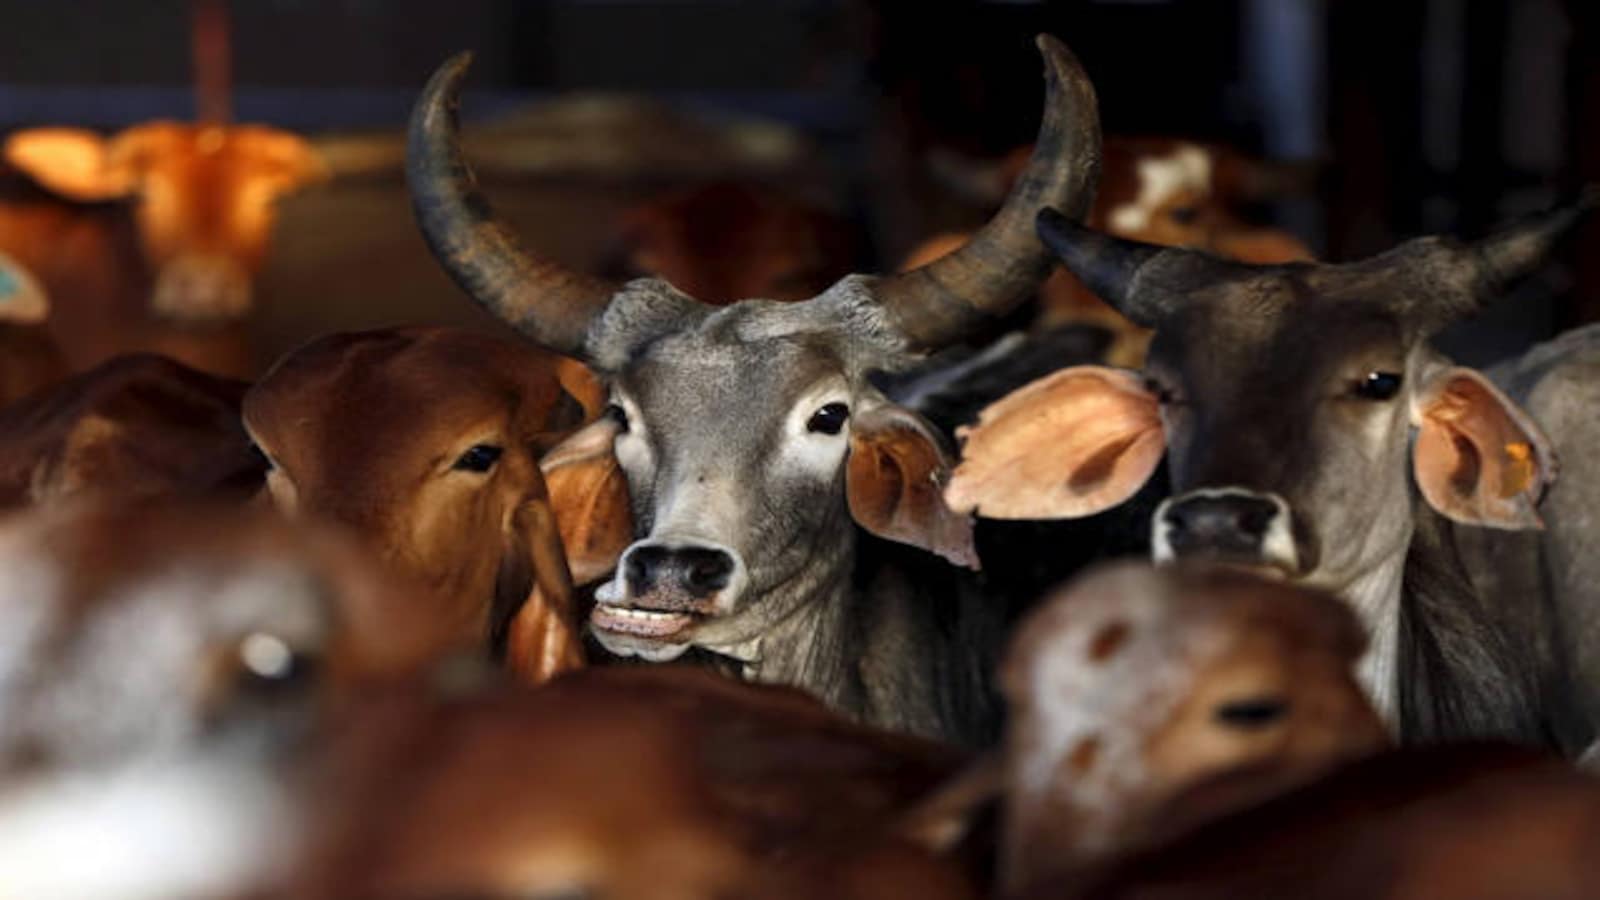 75-year-old Mumbai man imprisoned for keeping his cattle out in rain in 2013